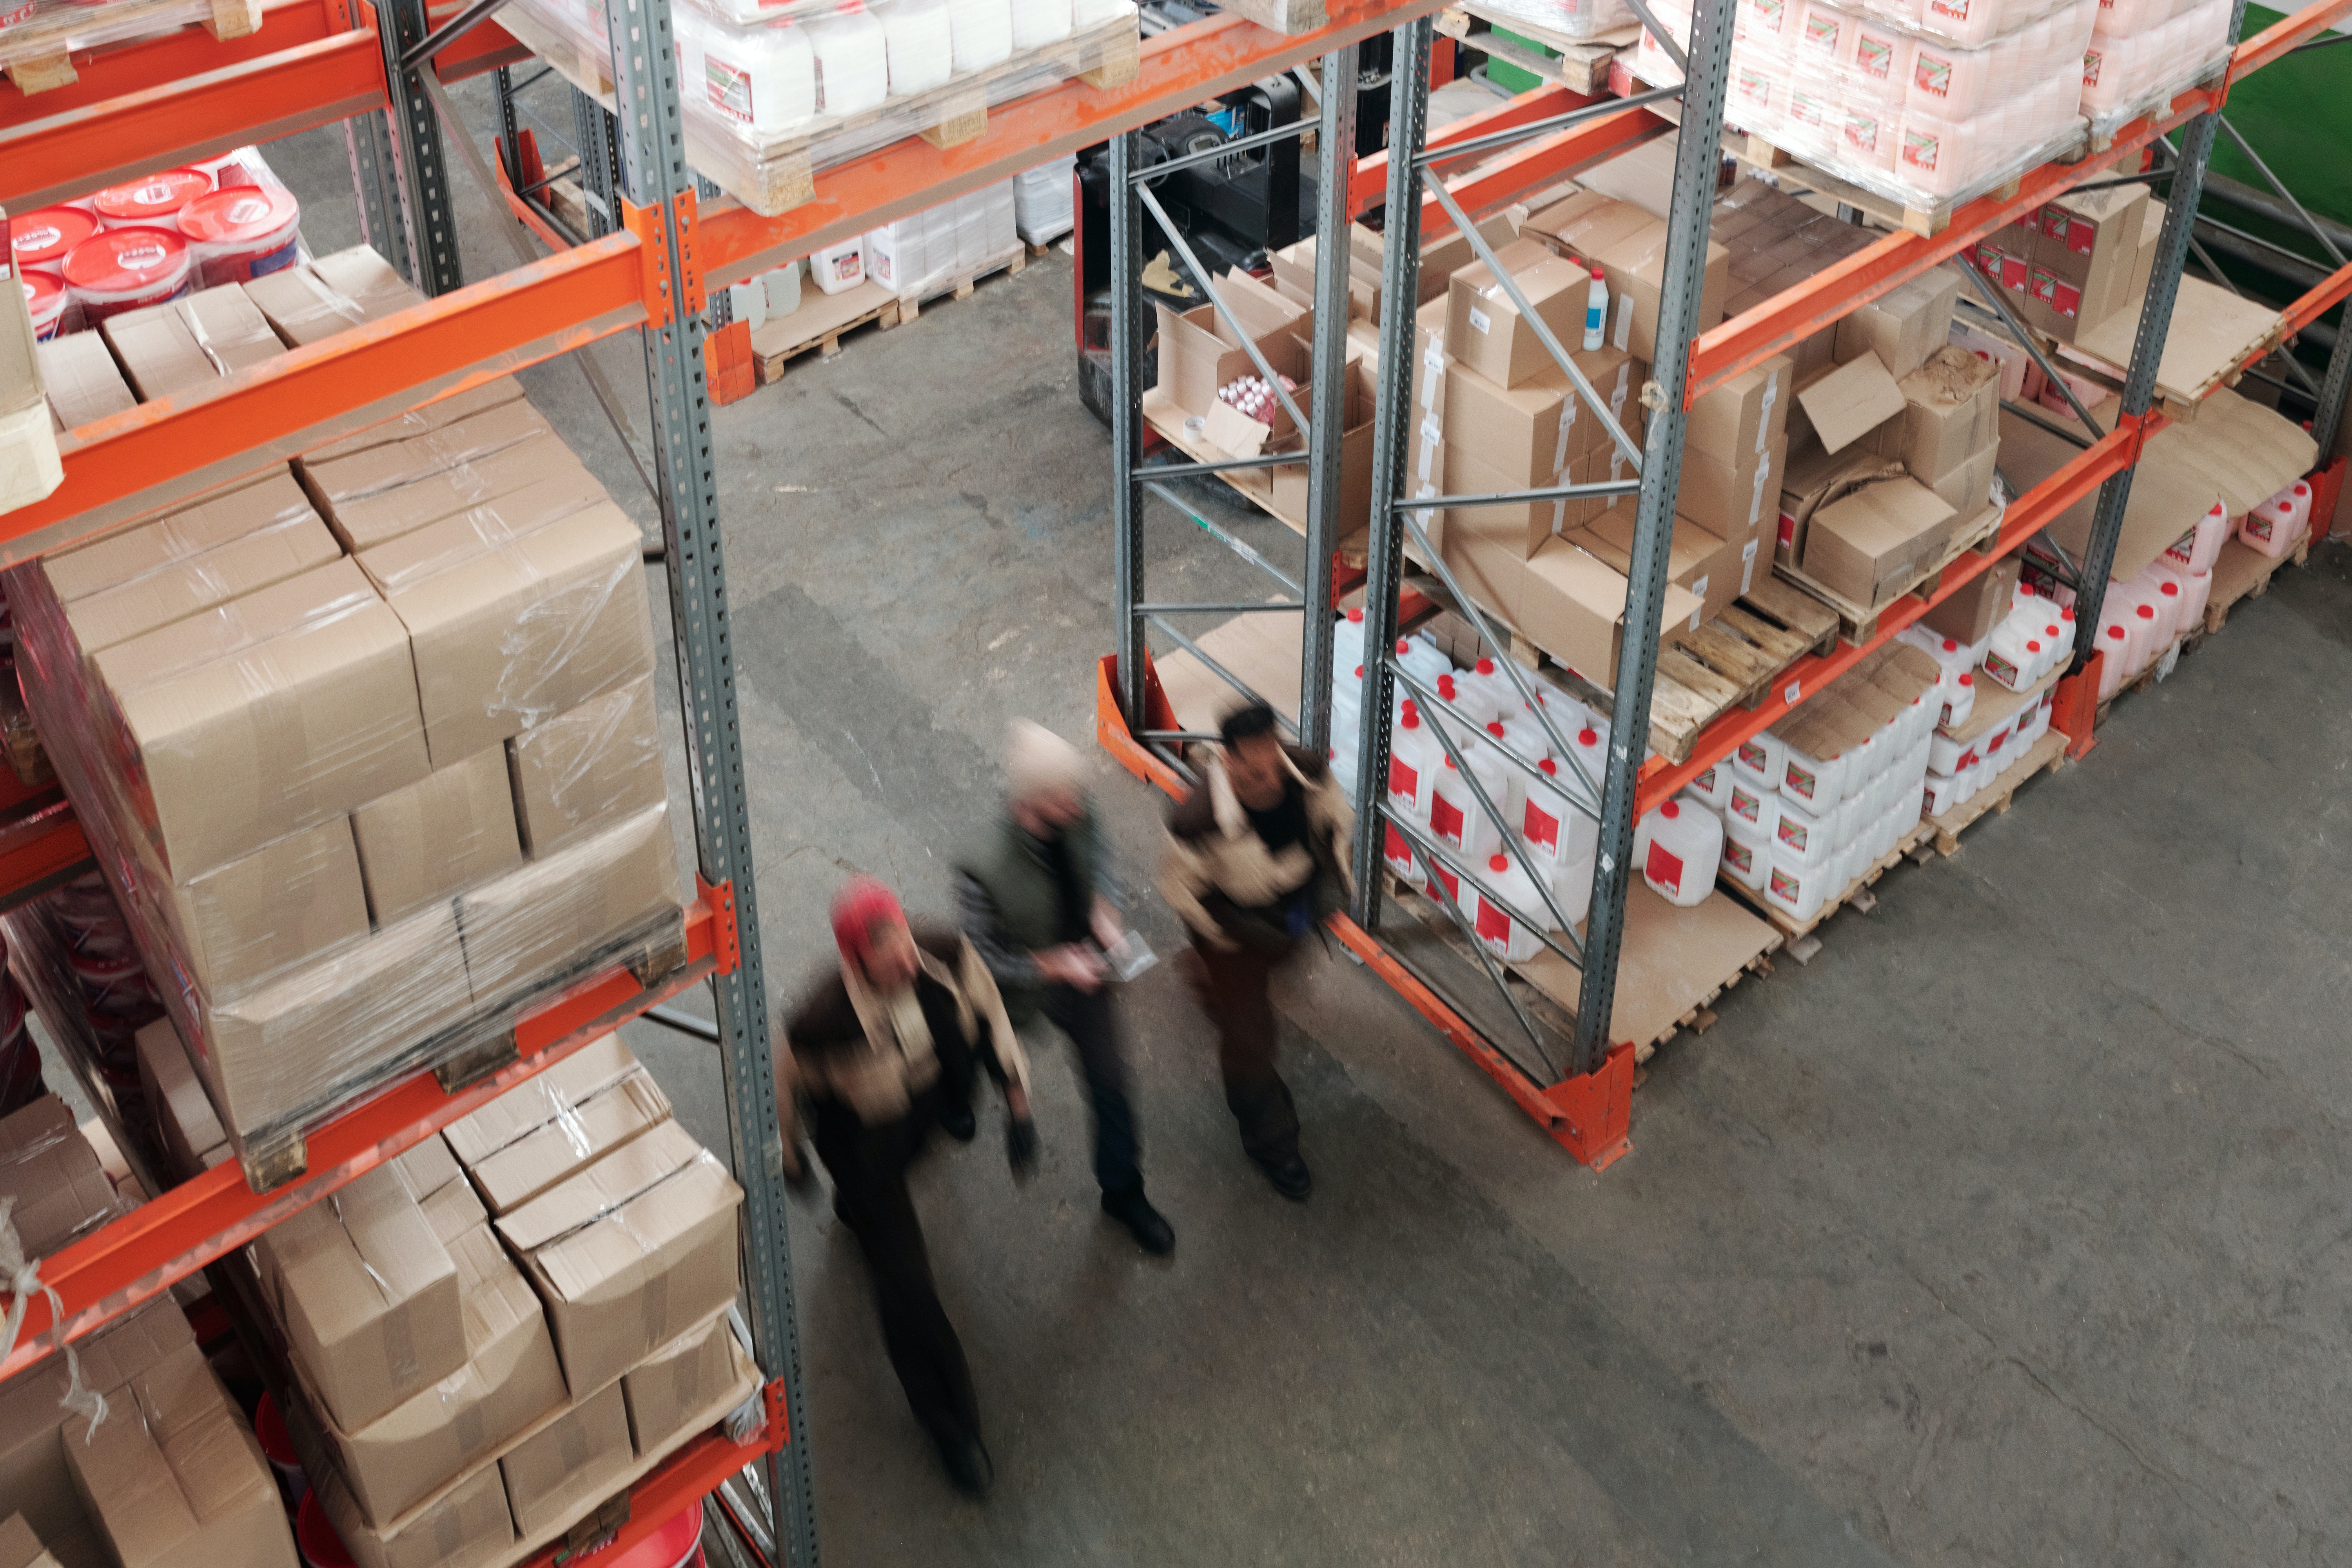 Employees walk past shelves in a warehouse